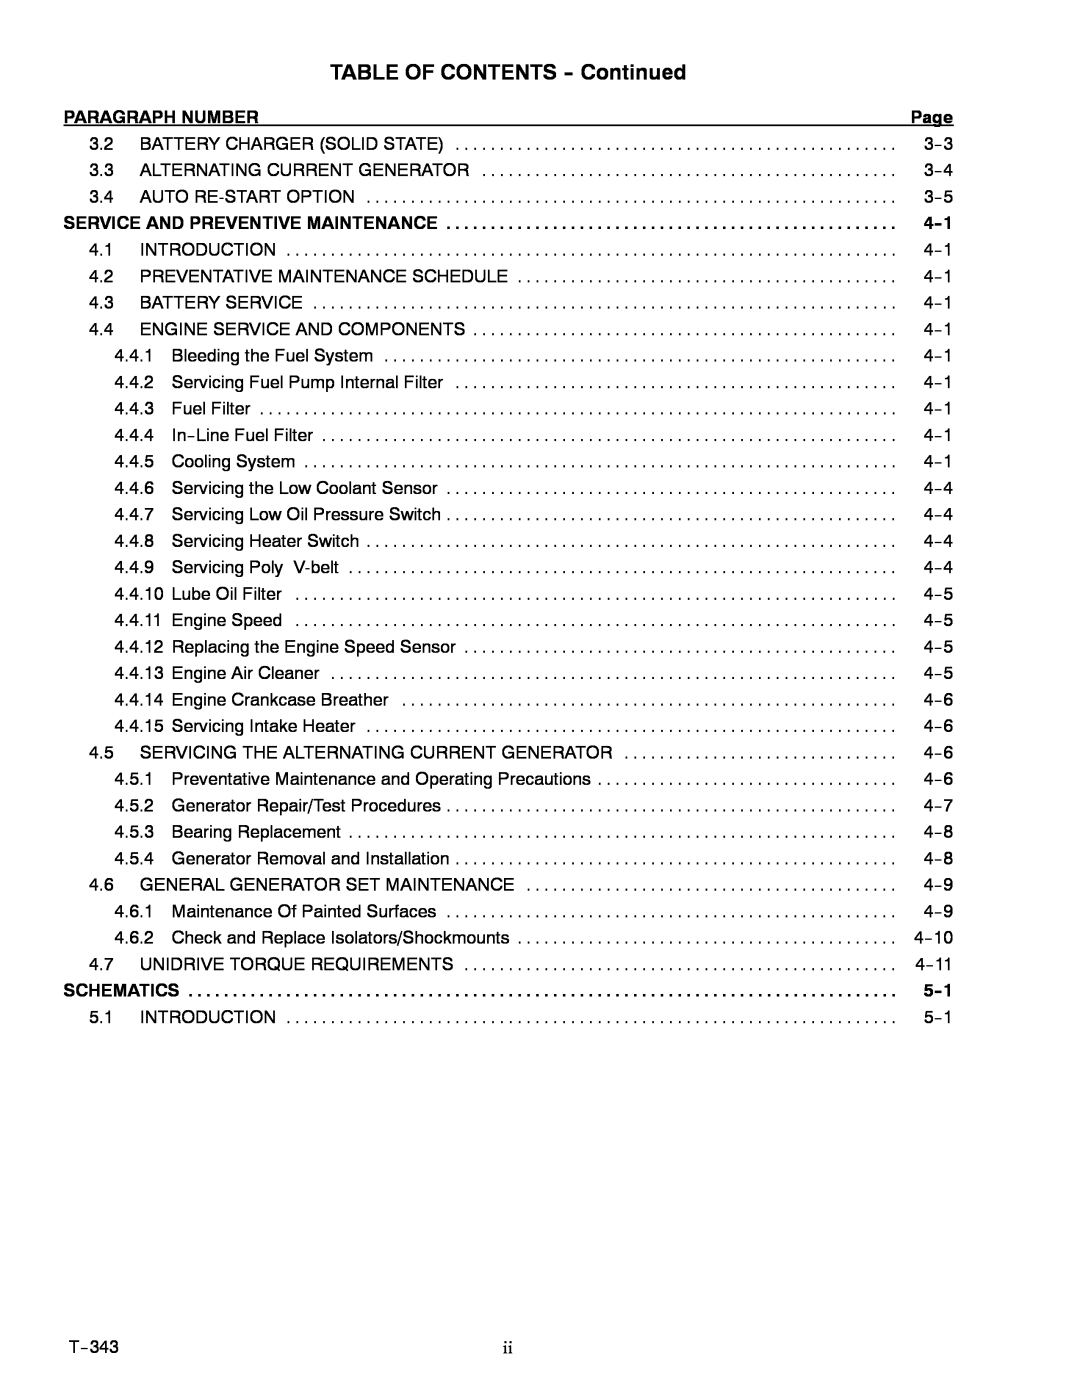 Carrier 69UG15 manual TABLE OF CONTENTS - Continued, 4--1, 5--1, Paragraph Number, Page 